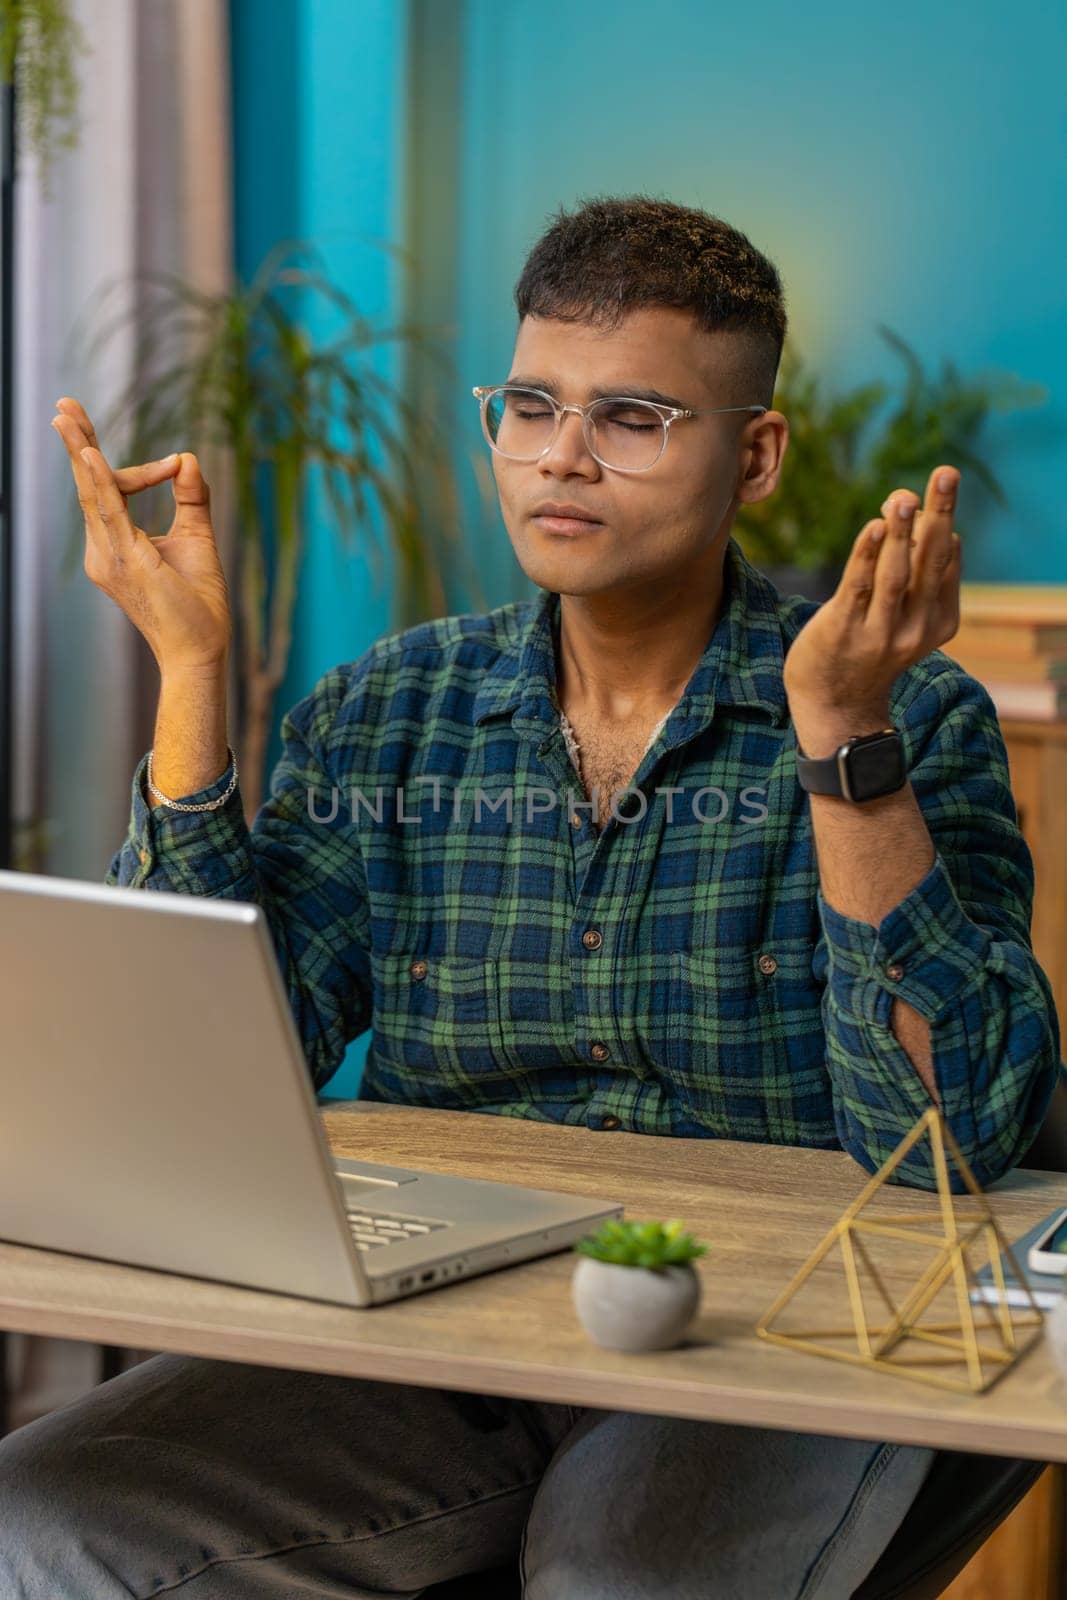 Indian man working on laptop, breathes deeply, eyes closed meditating with concentrated thoughts, peaceful mind. Hindu guy taking a break, relaxing sitting at home office table workplace. Vertical